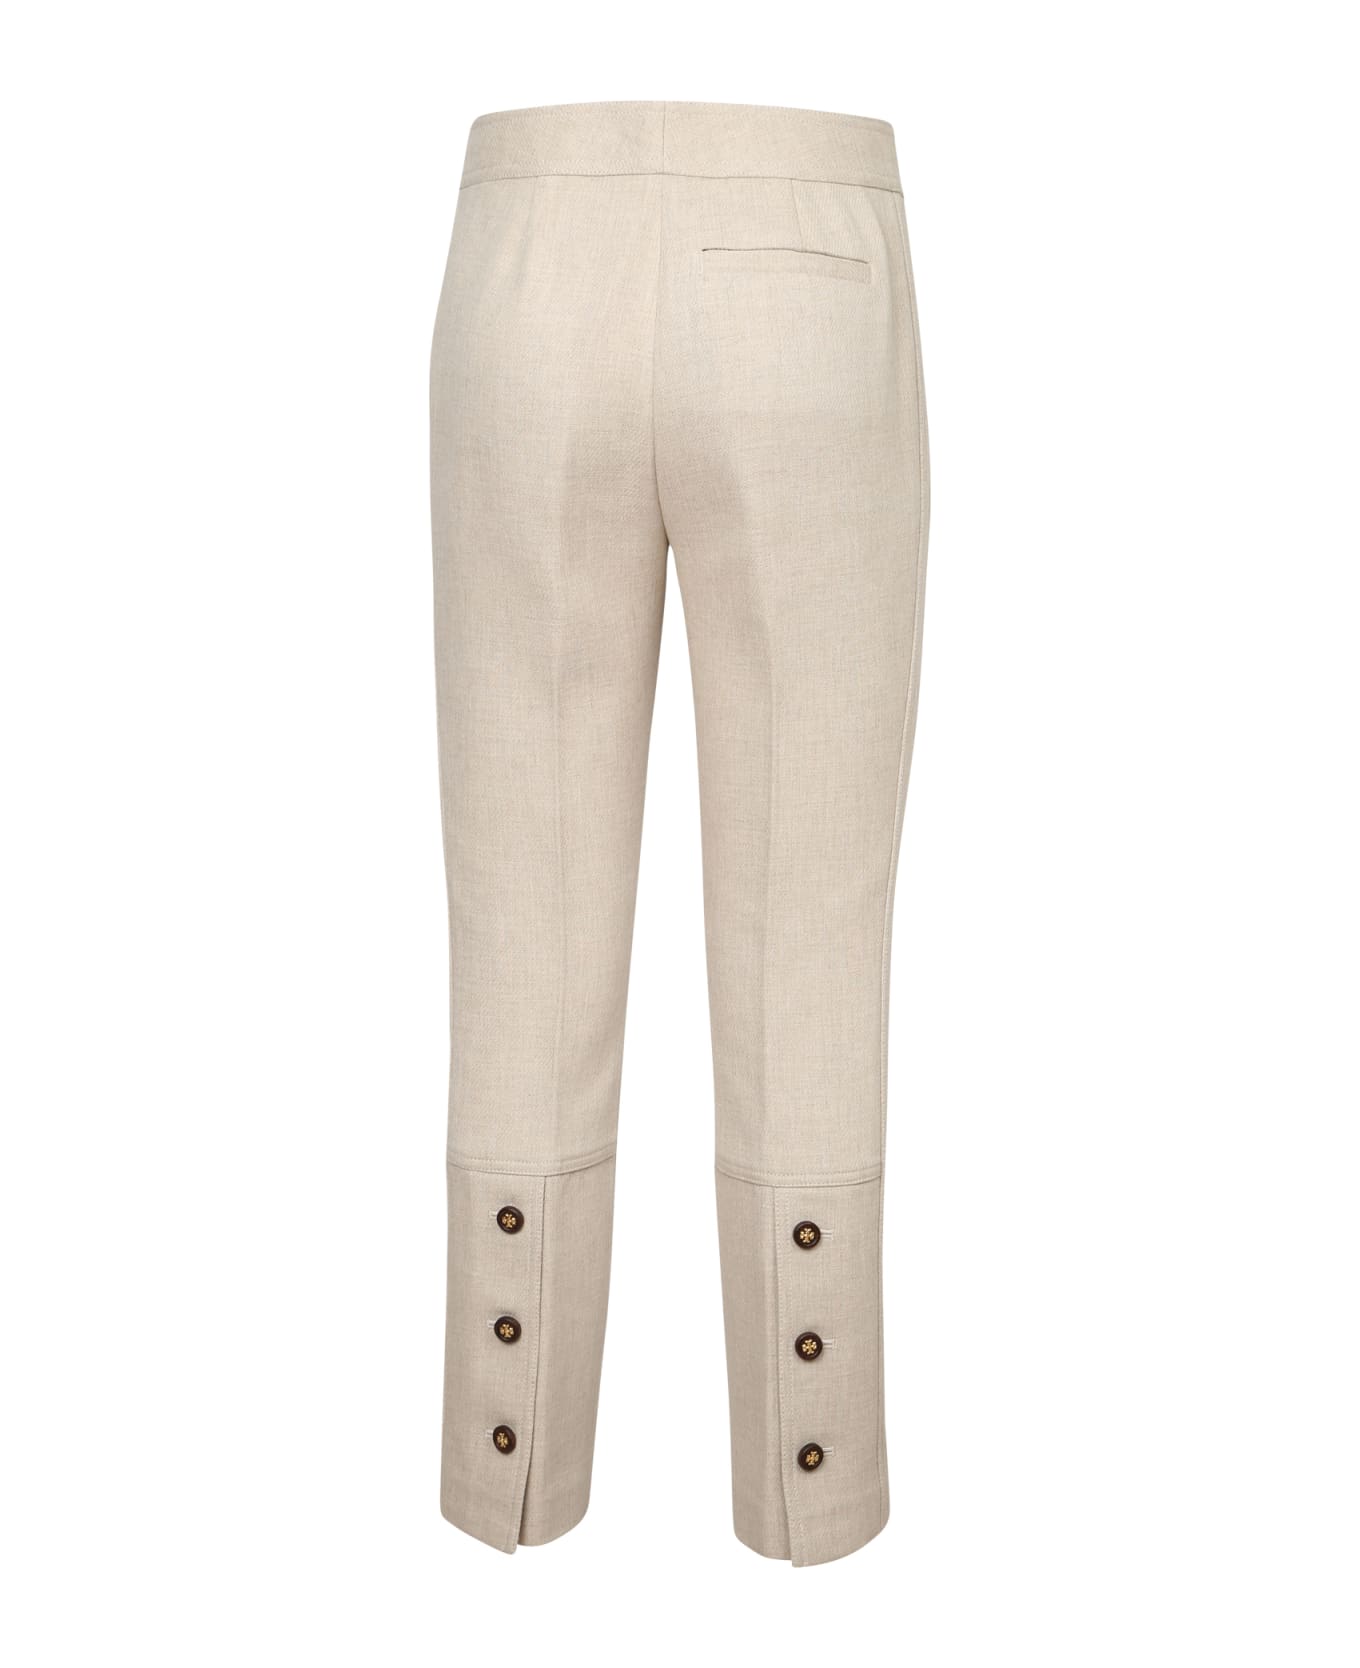 Tory Burch Phoebe Twill Trousers Ivory Trousers - White